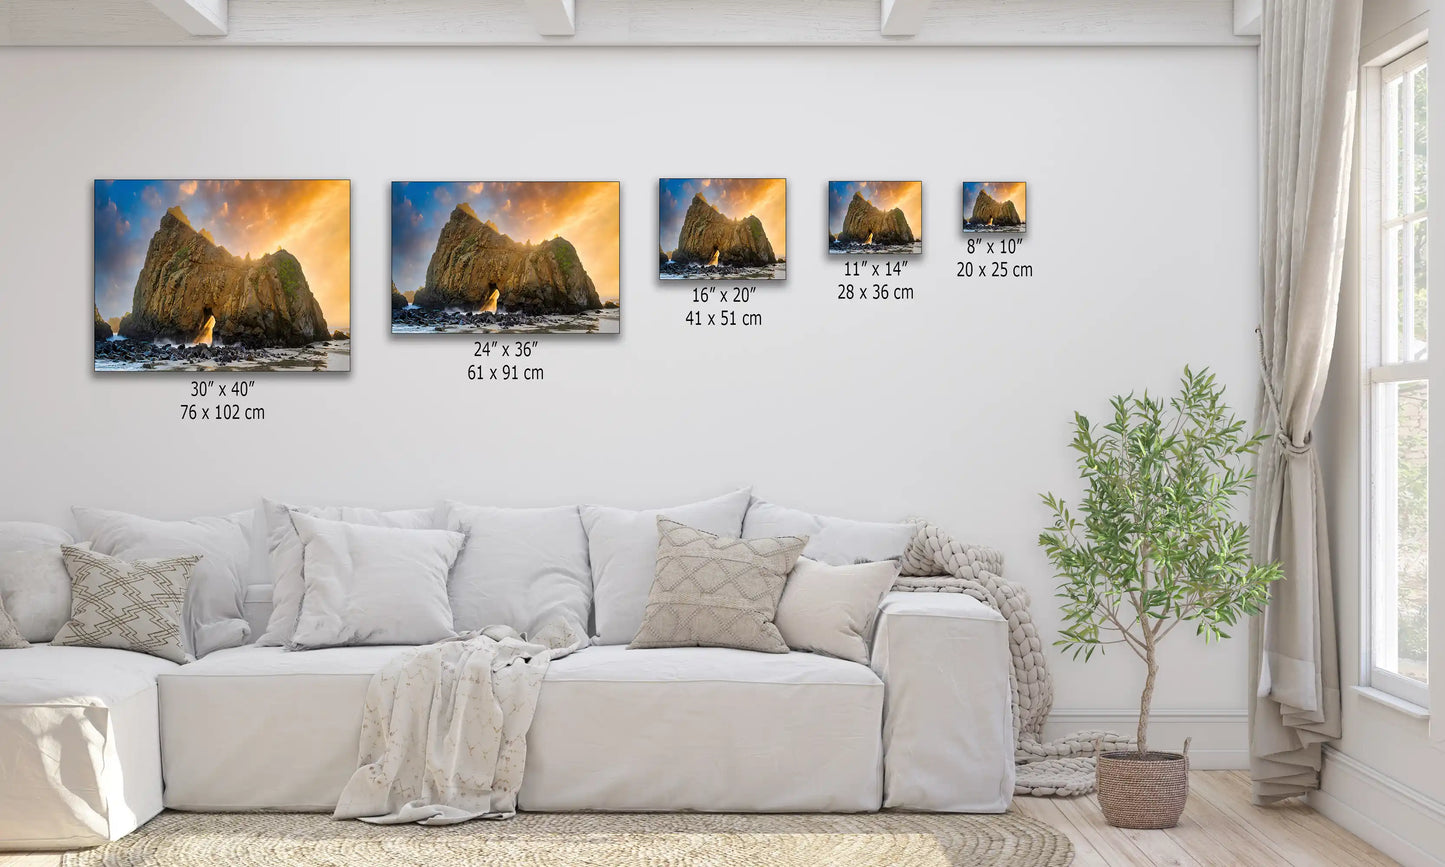 Various sizes of the Keyhole Arch canvas prints above a couch, illustrating the scale from 8"x10" to 30"x40", with a breathtaking sunset view.